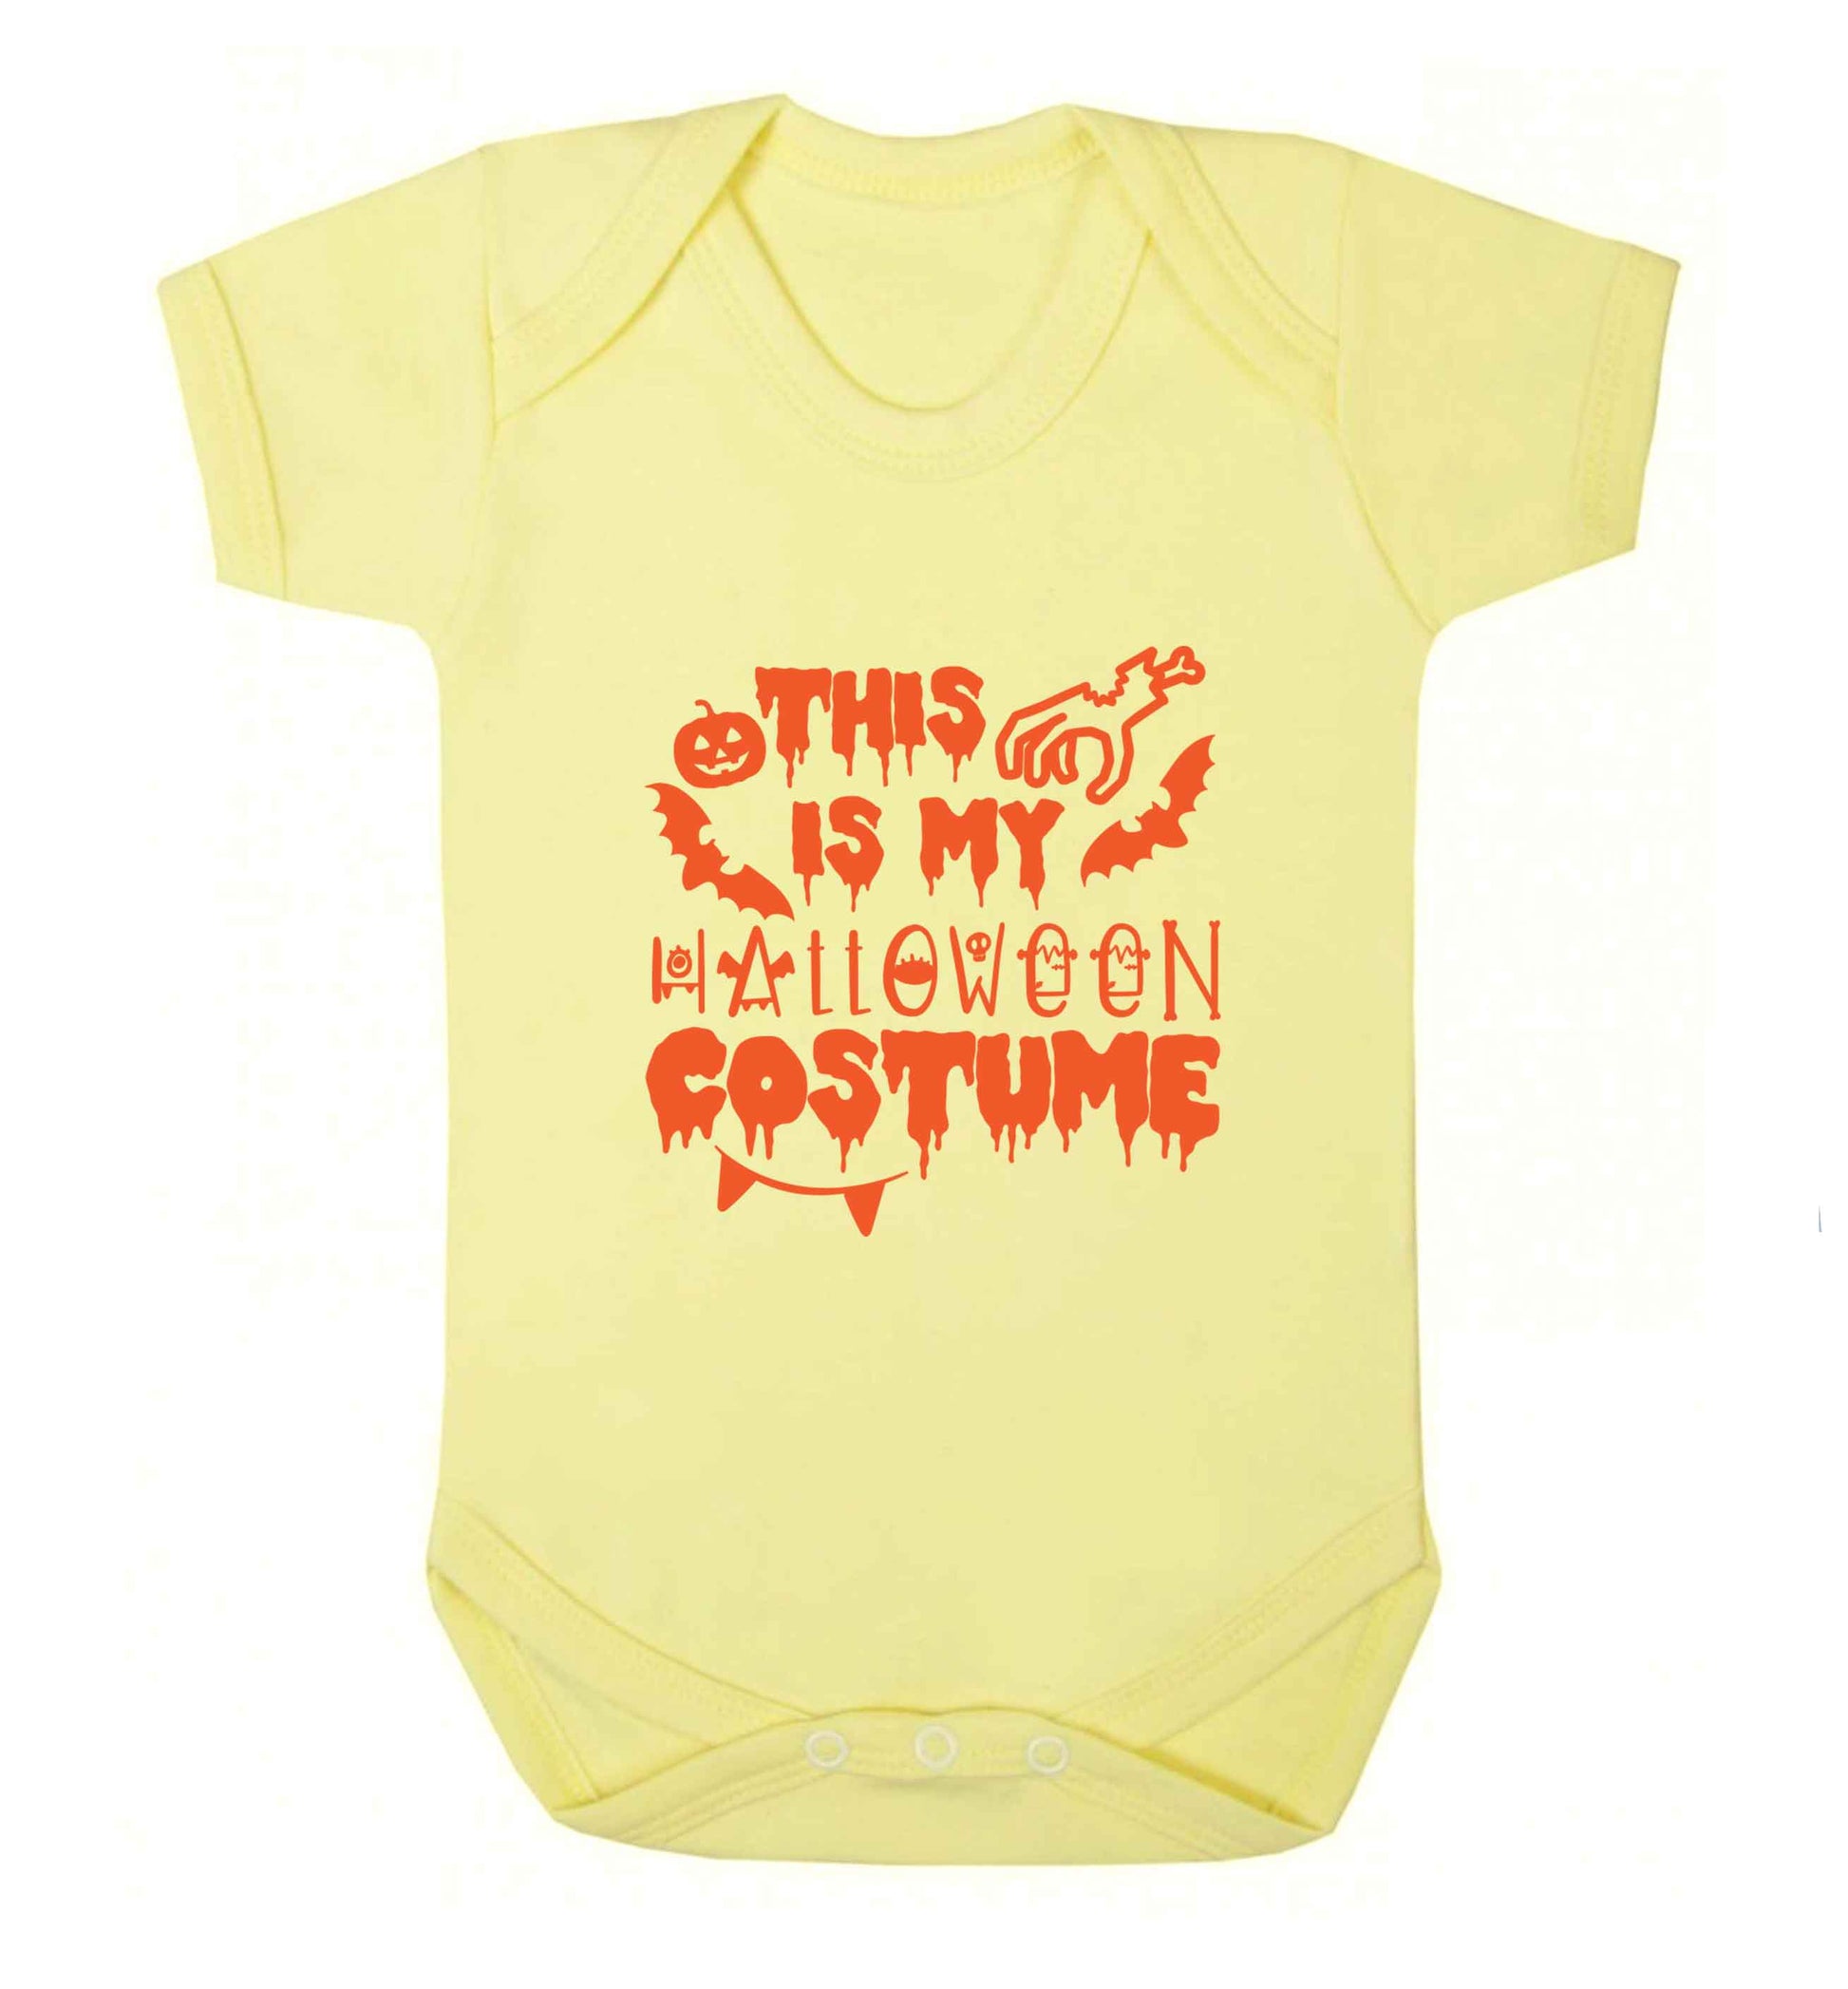 This is my halloween costume baby vest pale yellow 18-24 months